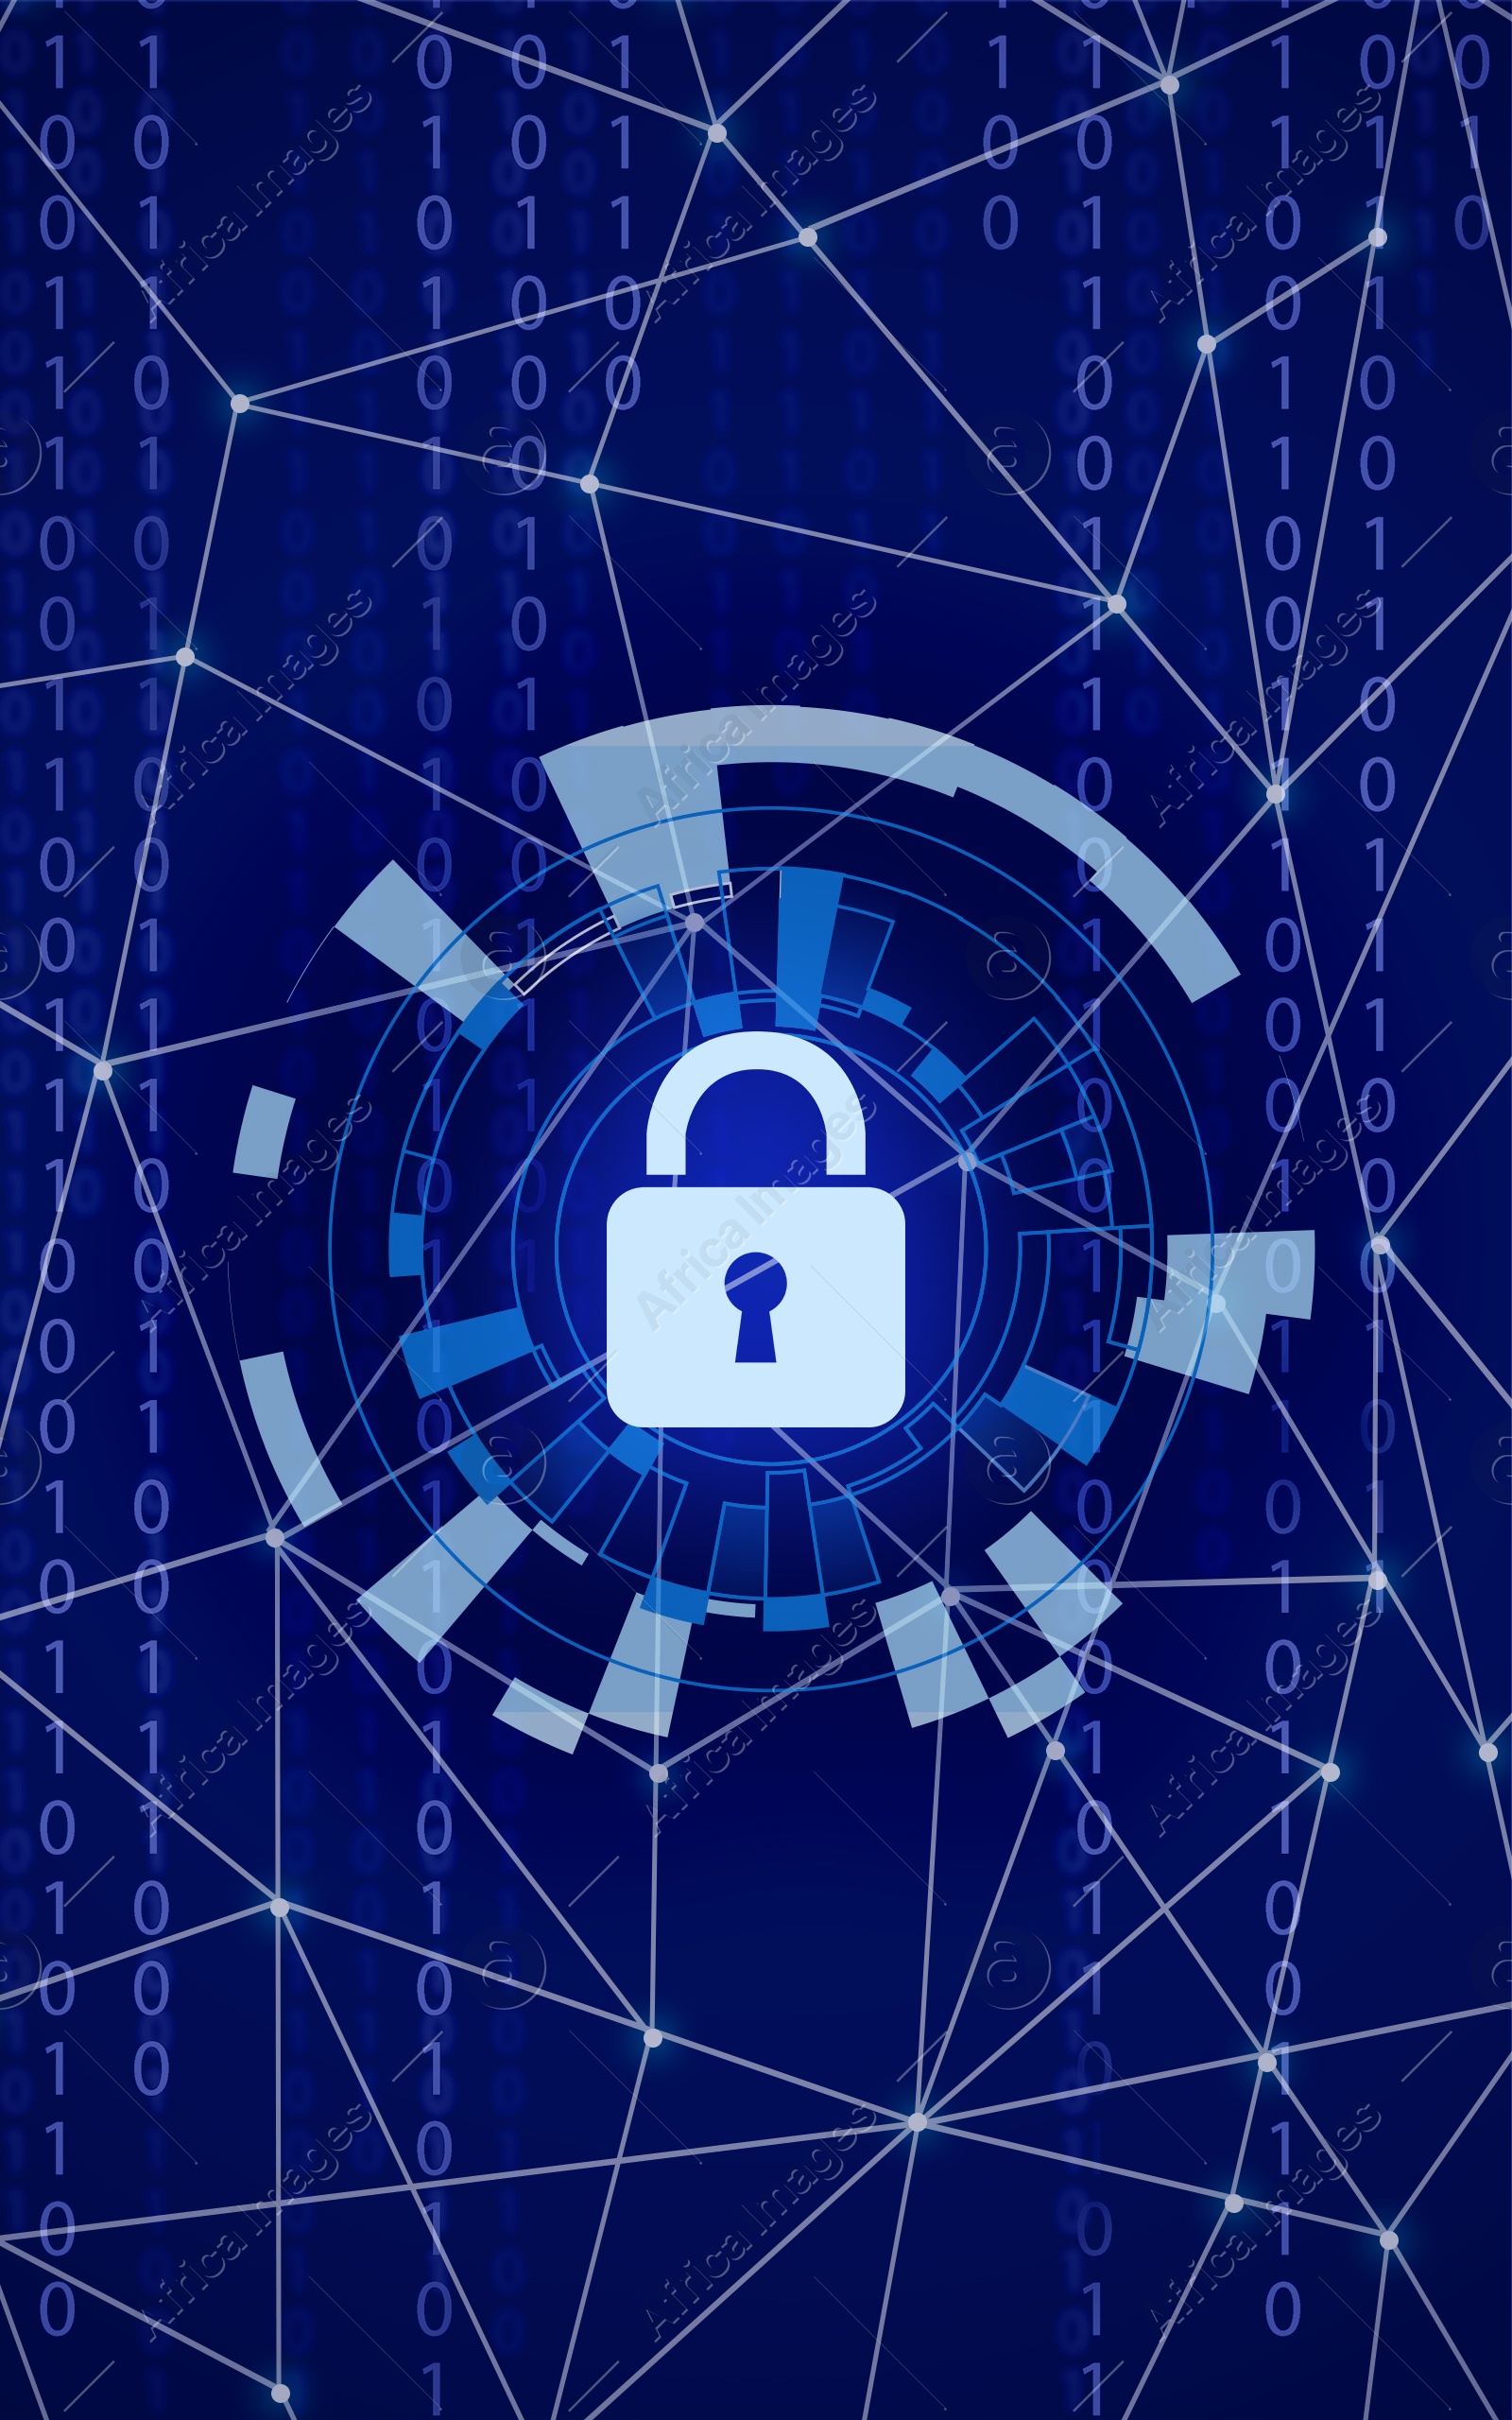 Illustration of Padlock illustration as symbol of cyber security on blue background with binary code